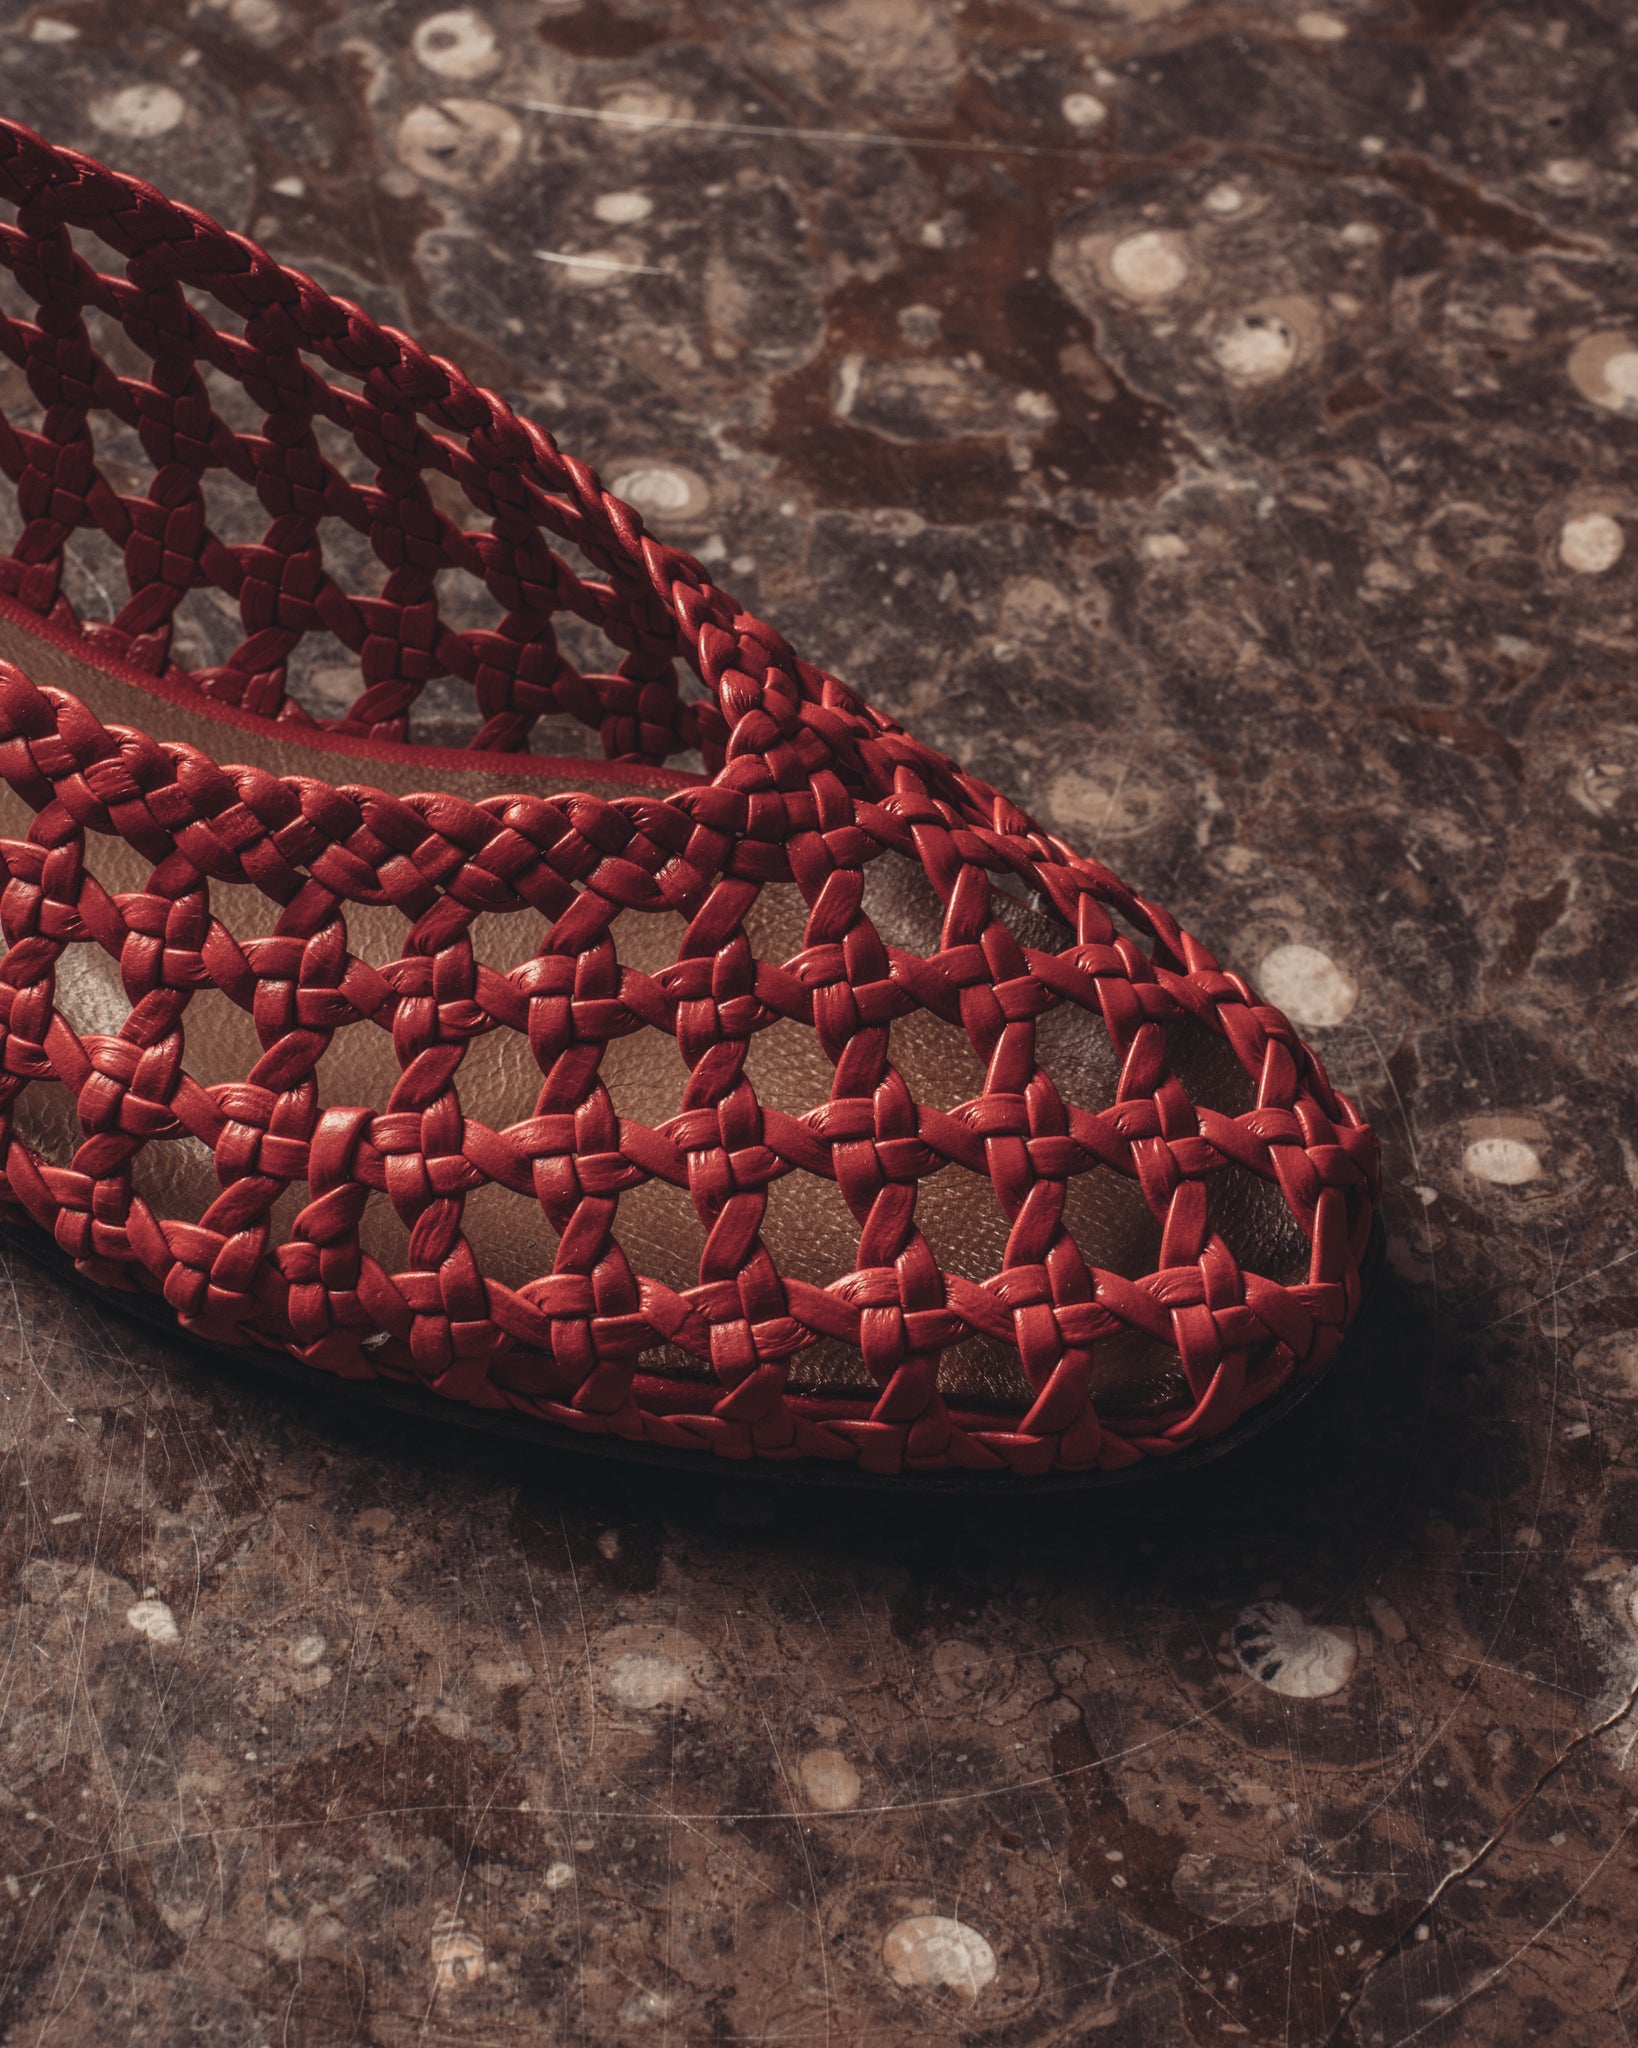 Sessi 10 Hand-braided leather Ruby red - Anonymous Copenhagen